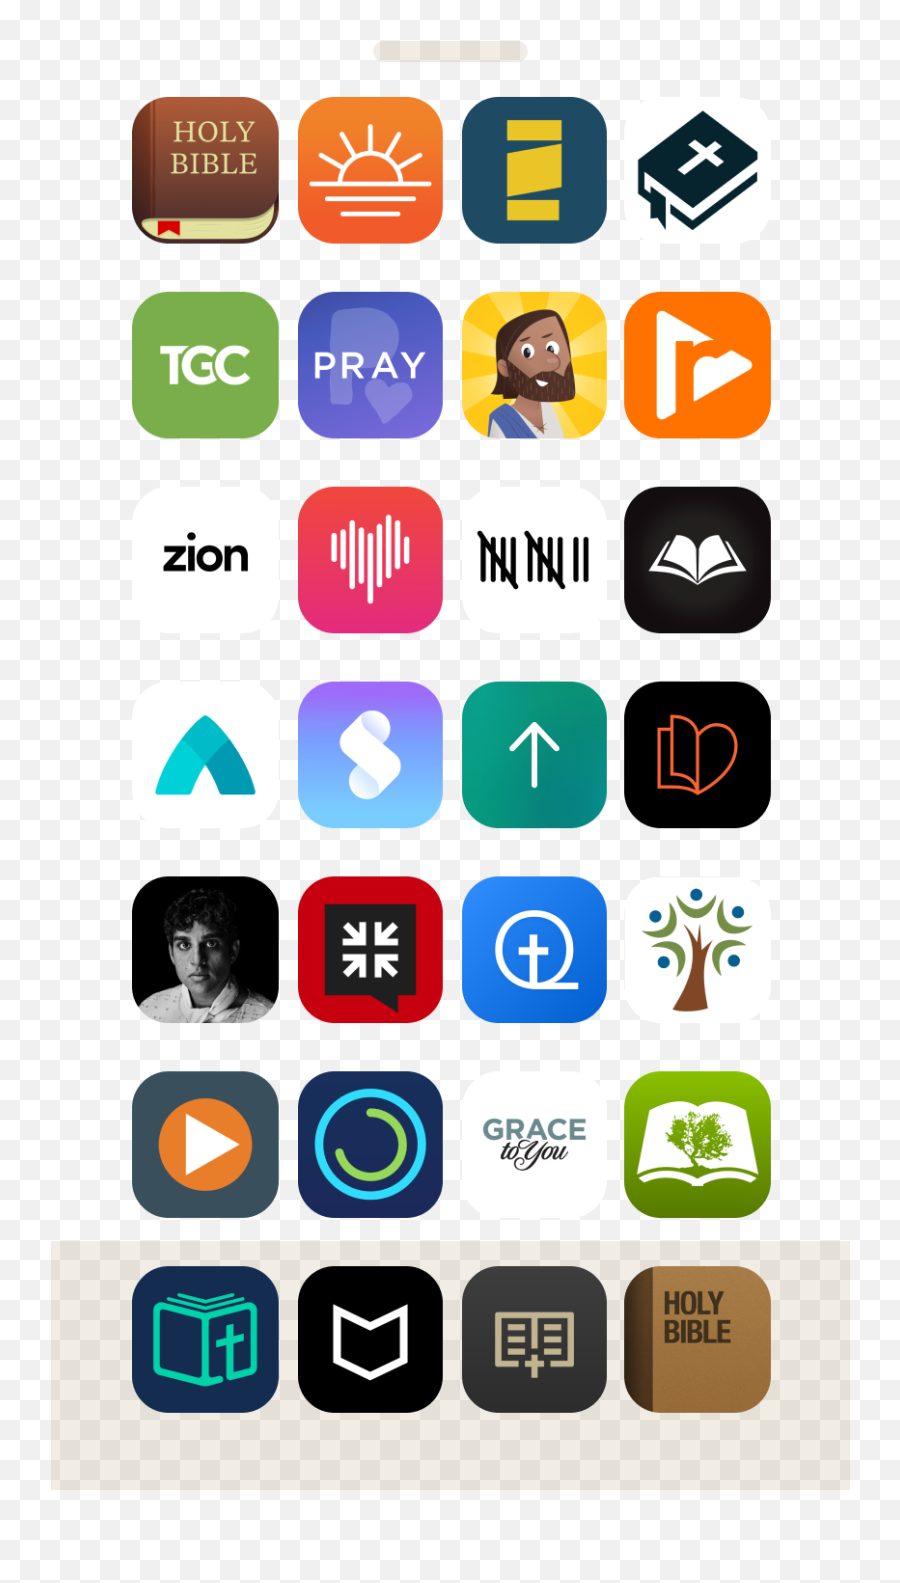 The Ultimate List Of Awesome Apps For Christians - Technology Applications Emoji,Christian Emoticons For Texting